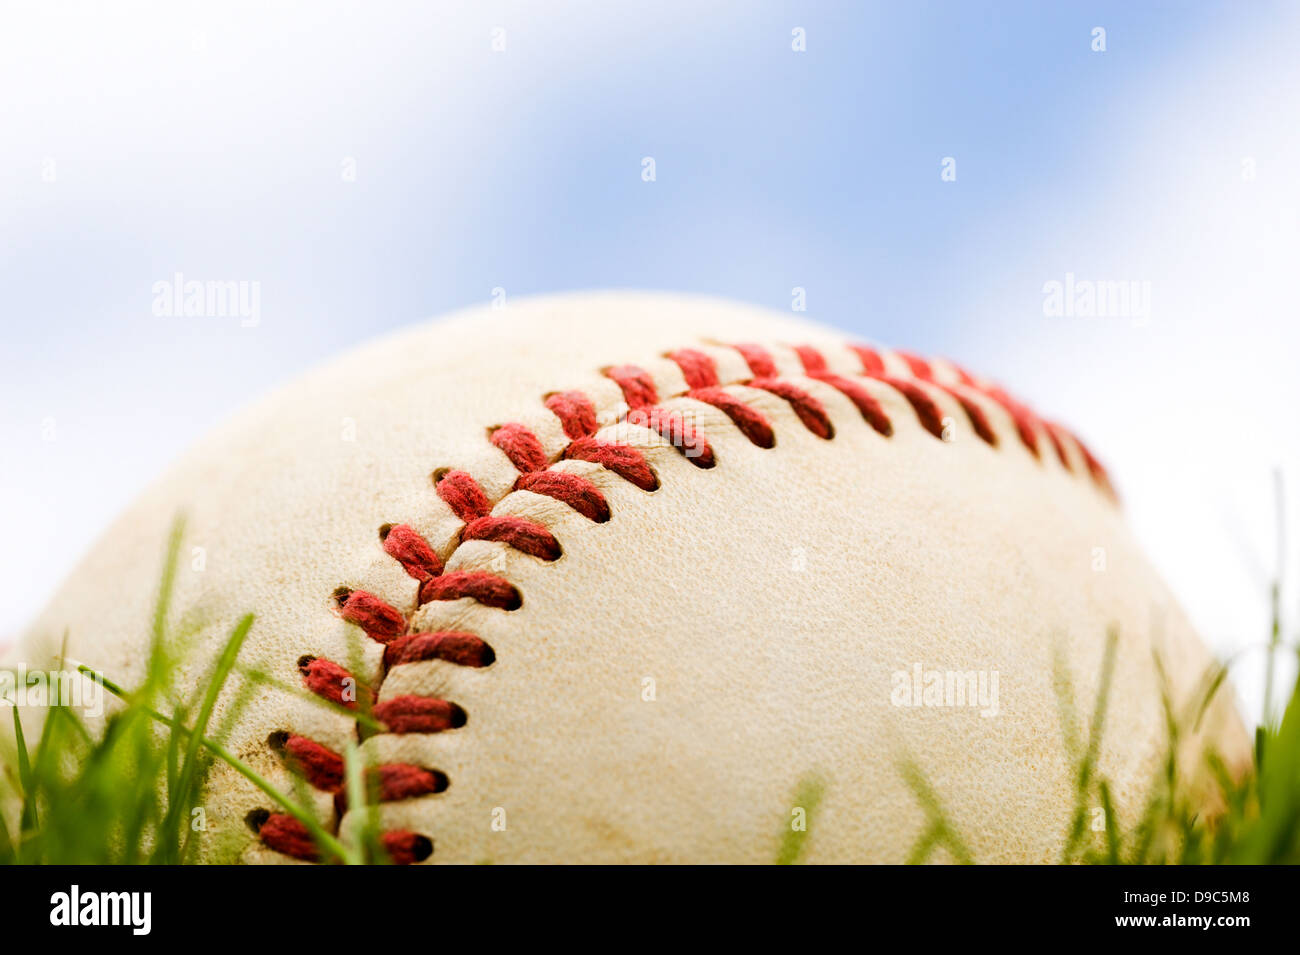 Close-up of a baseball lying in the grass against a partly cloudy sky Stock Photo